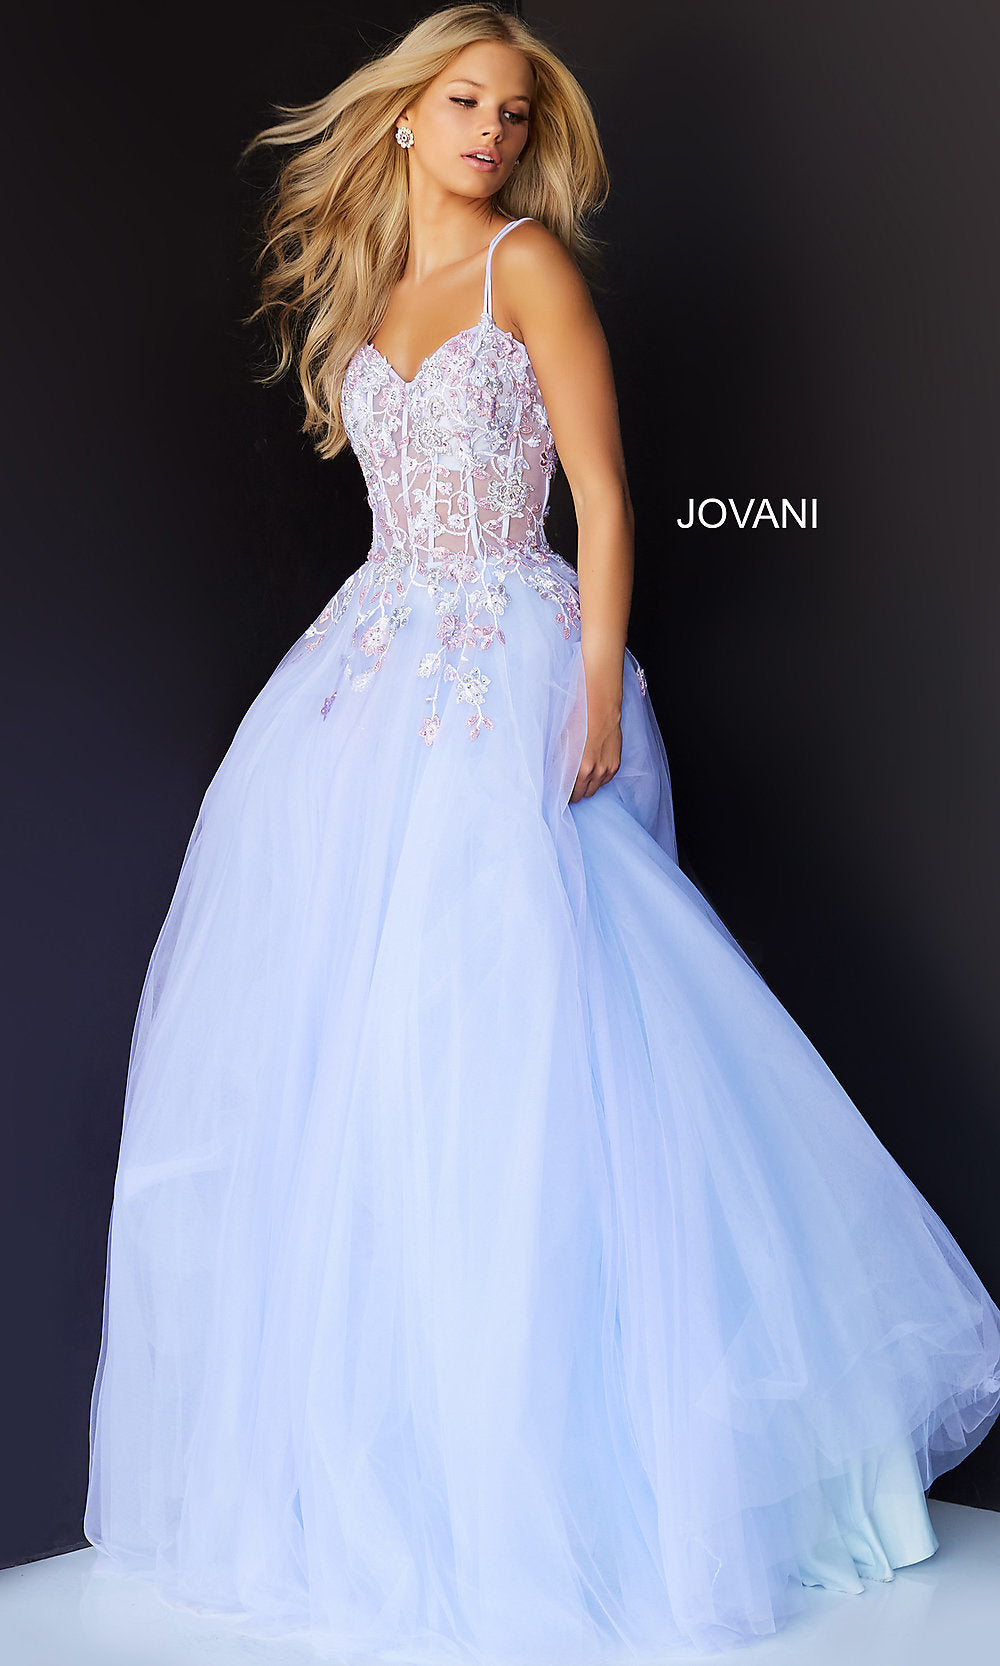 Jovani Formal Dresses: Elevate Your Style for Special Occasions Jovani Prom  05839 PROM USA BRIDAL & FORMAL WEAR BOUTIQUE